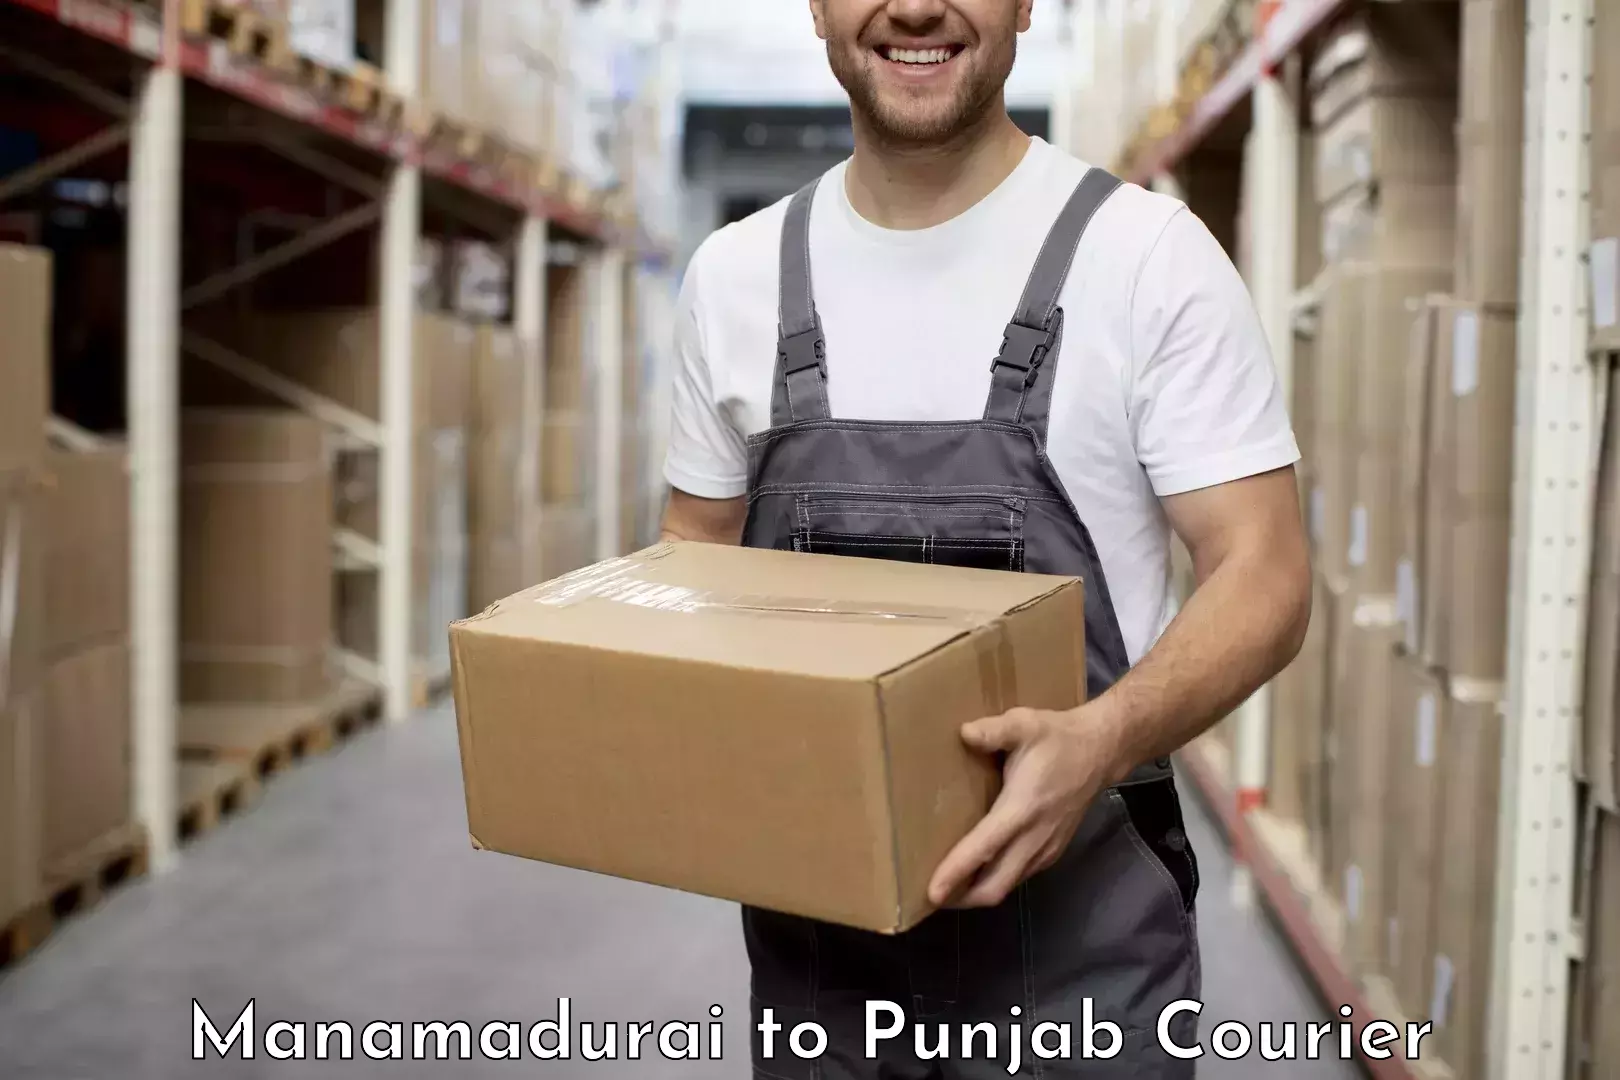 Global courier networks Manamadurai to Amritsar